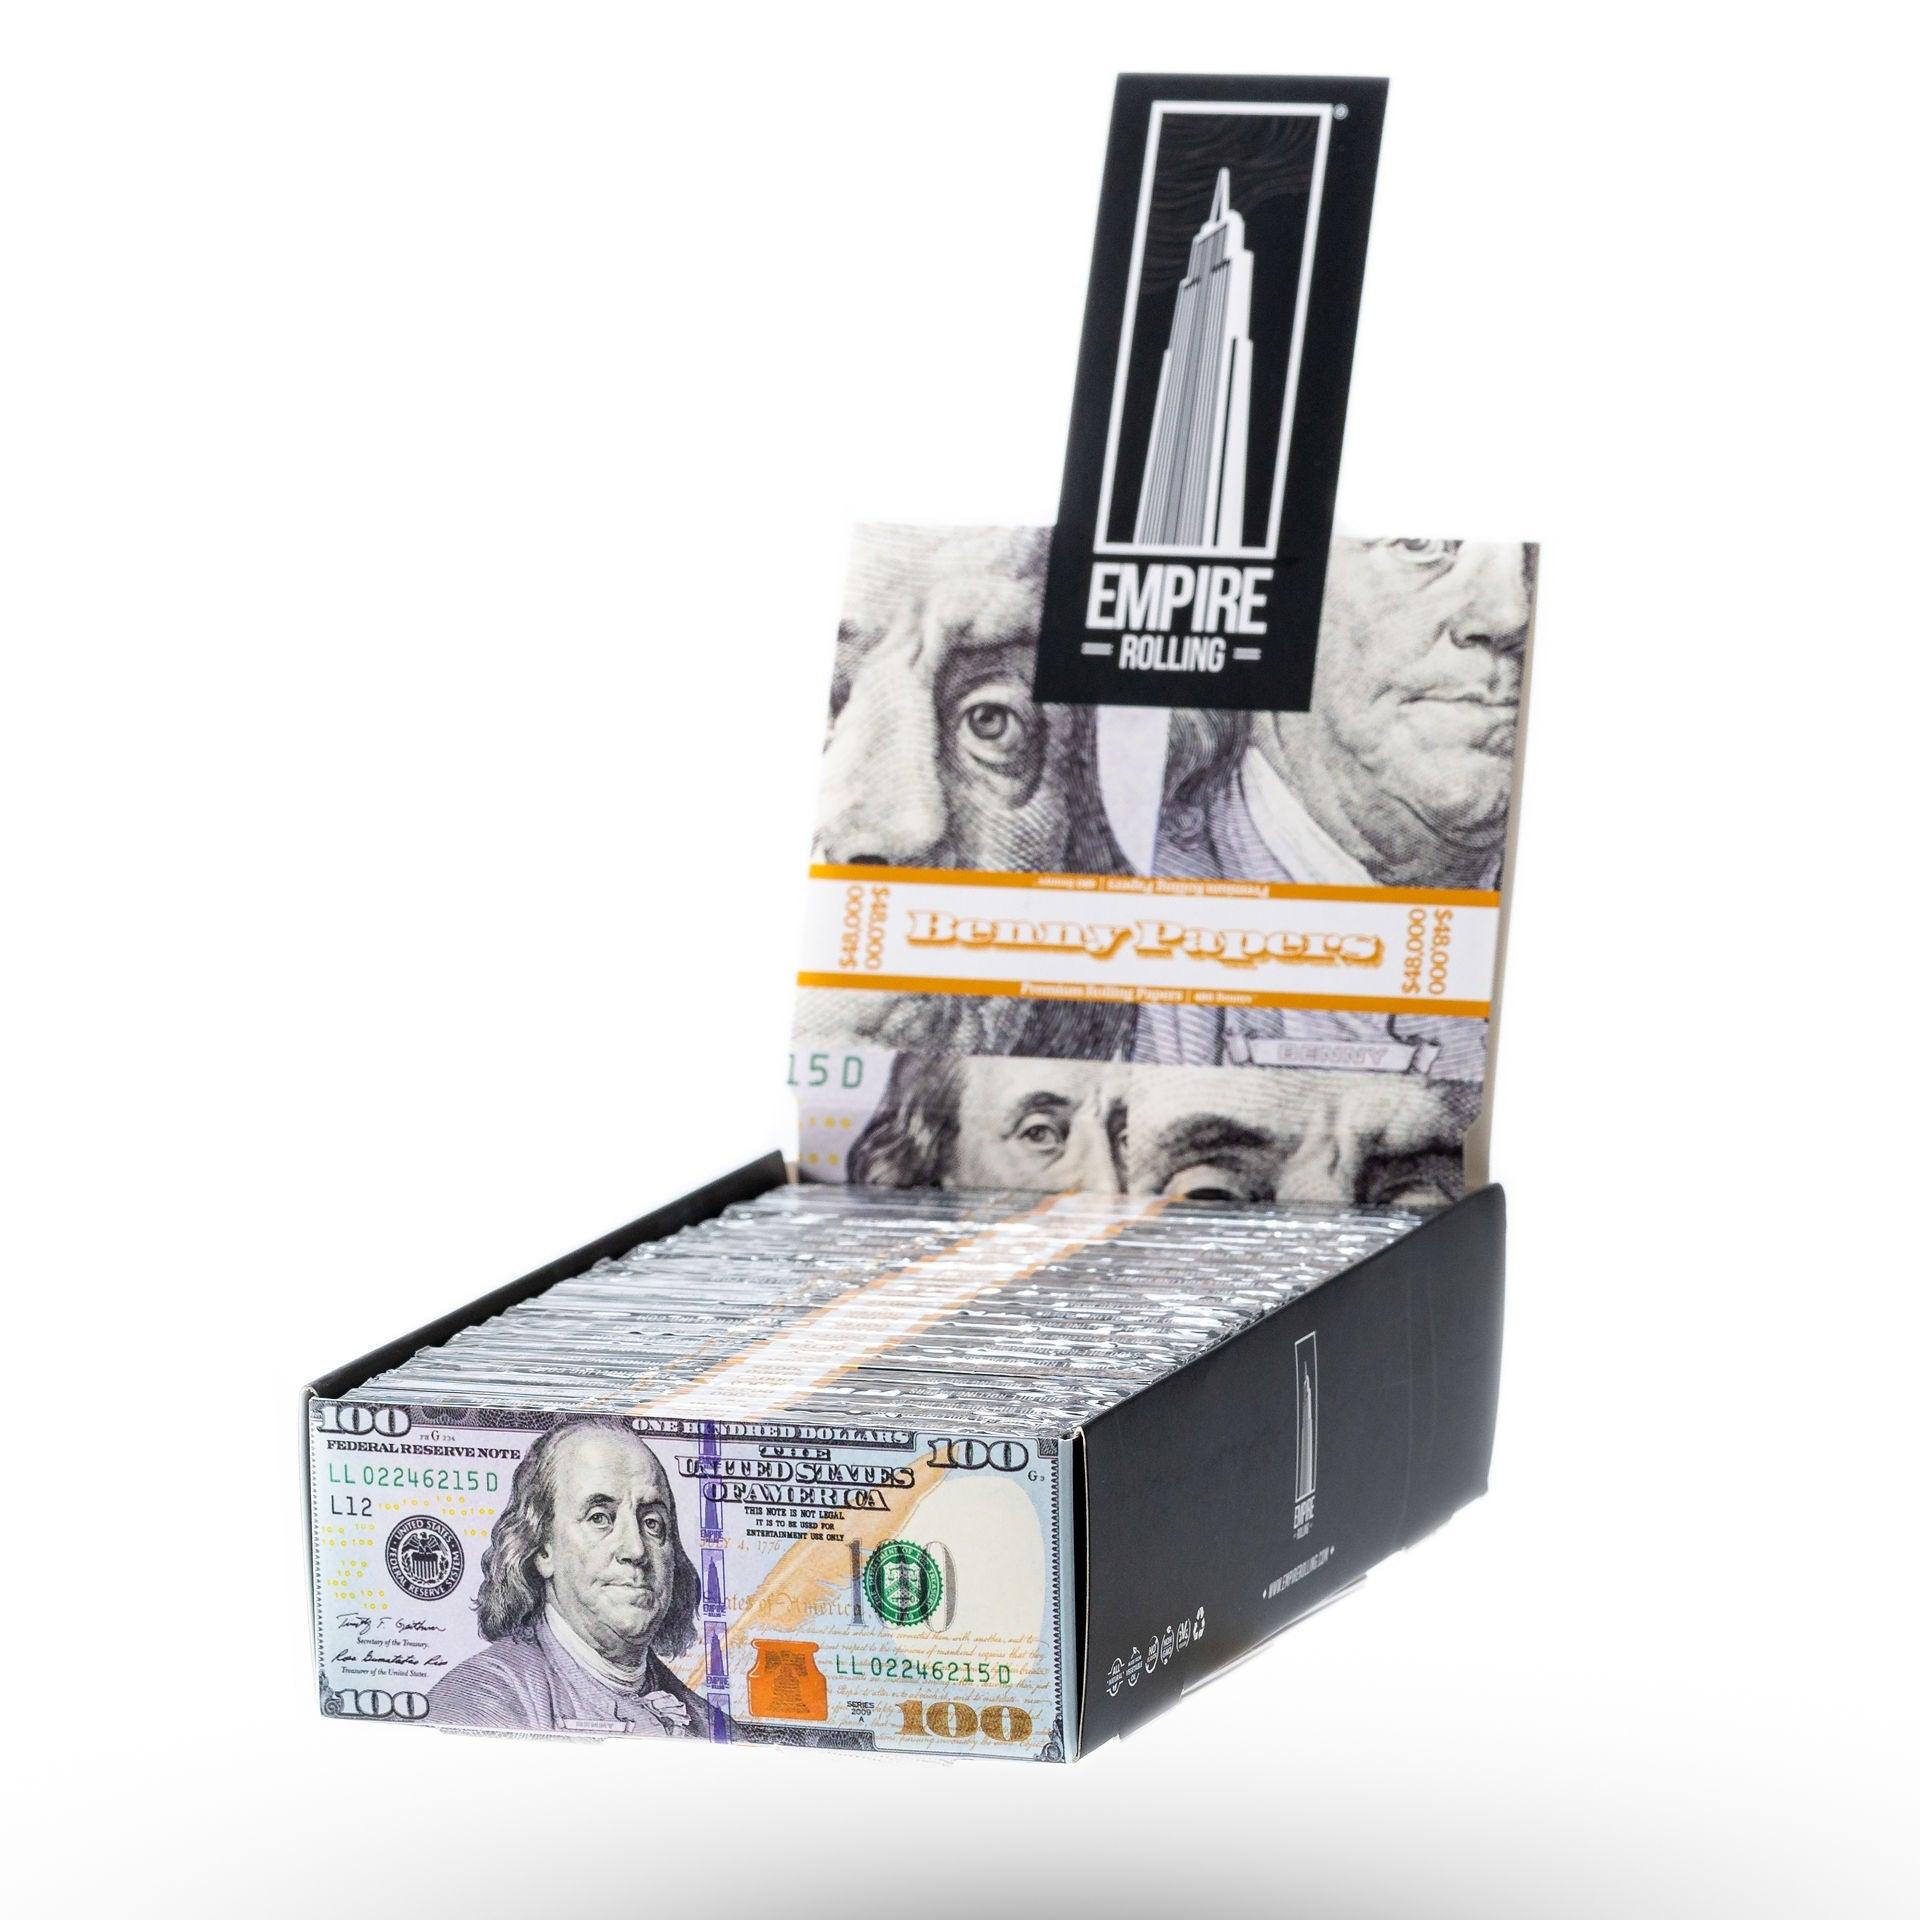 V8 Release - New and Improved Empire Rolling Products - Empire Rolling Papers